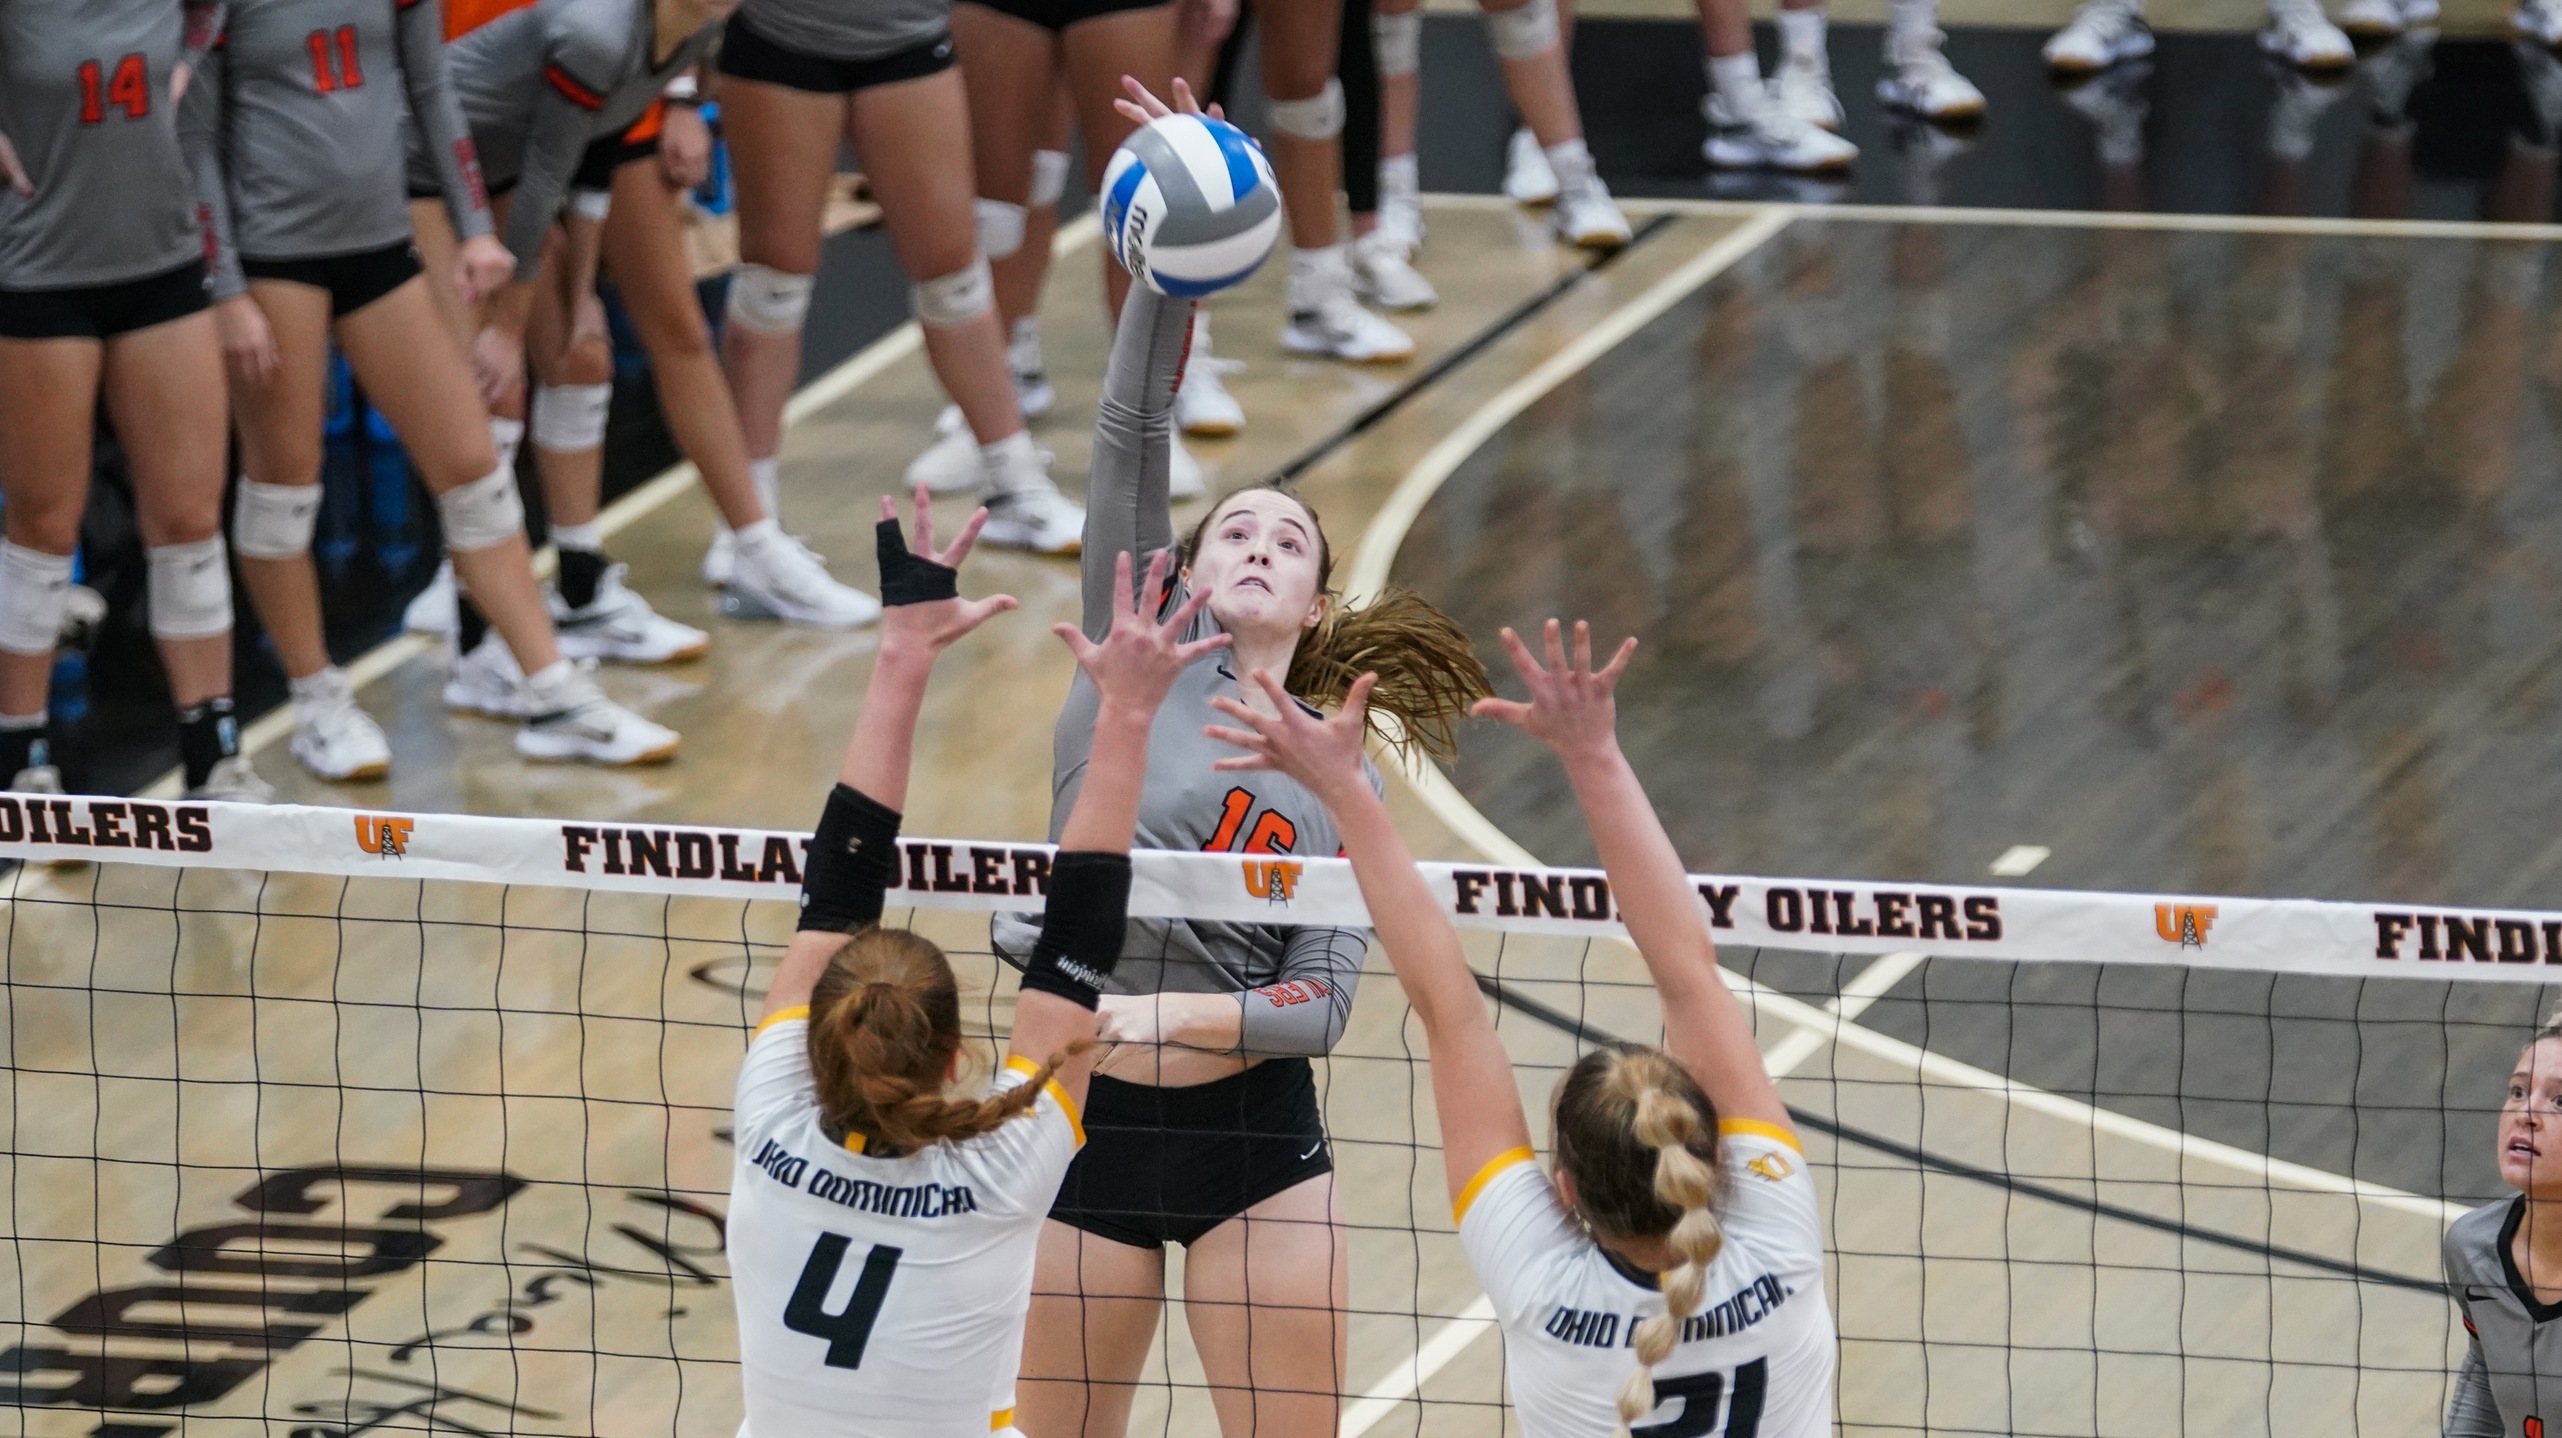 Findlay Loses 5 set Grudge Match to Cedarville.